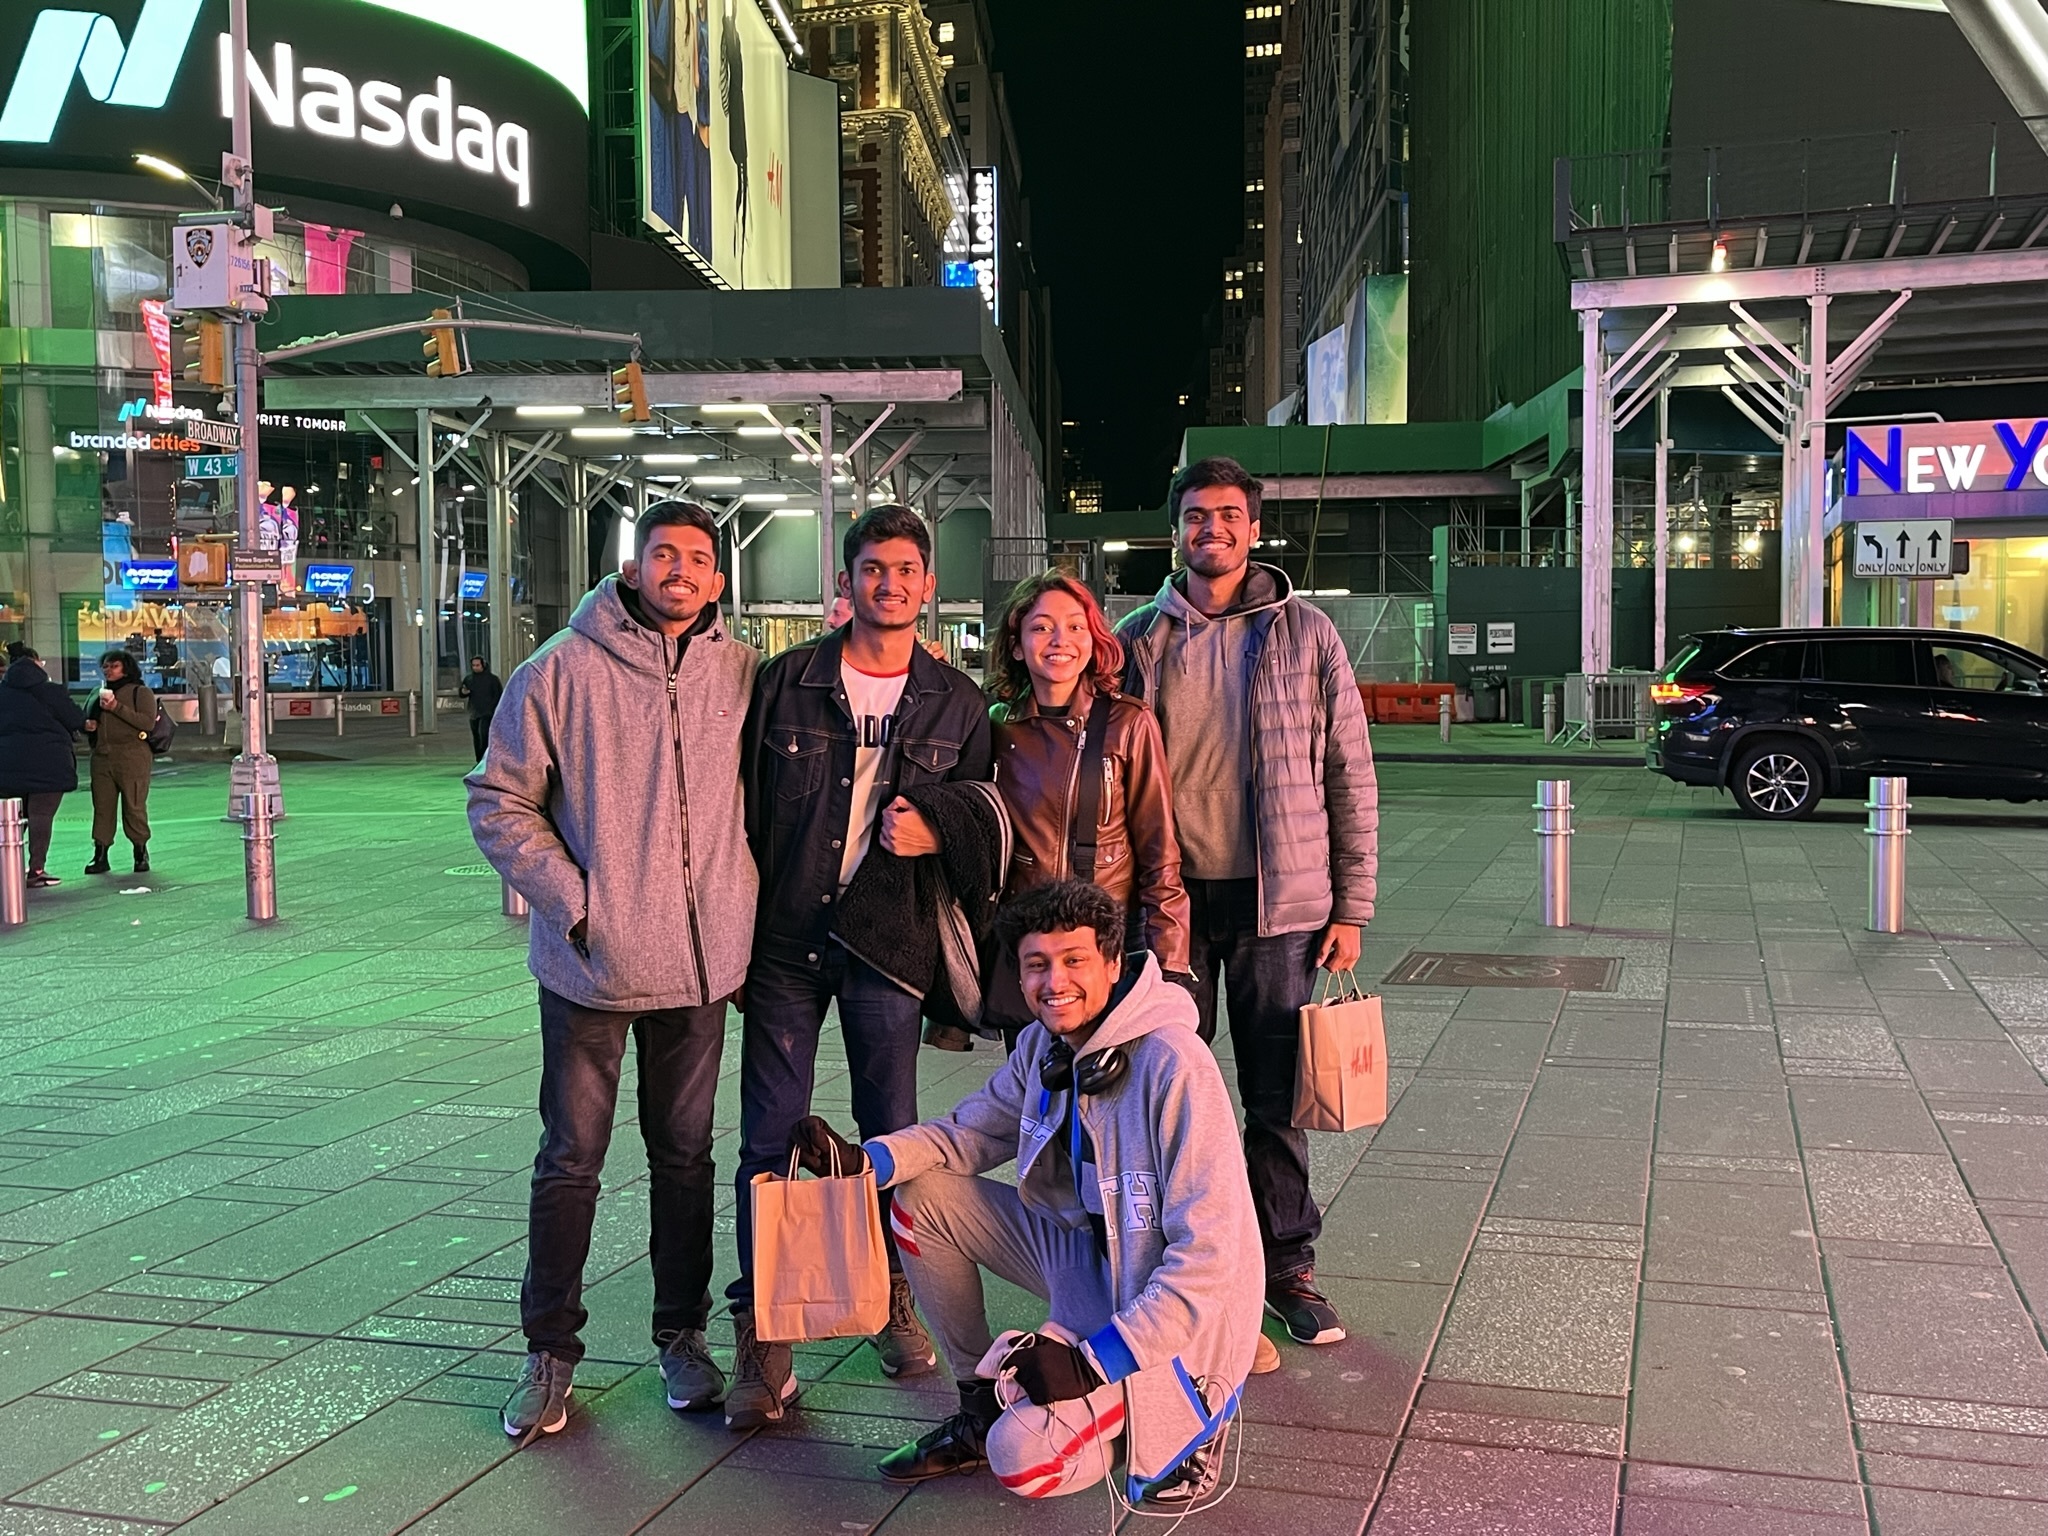 "We spent 75$ on a day's trip to New York City. Yes, it is possible to do it that cheap. We covered Dominique Ansel, John's of Bleecker St Pizza, Staten Island Ferry (+ Statue of Liberty), Times Square, and McGee's Pub."